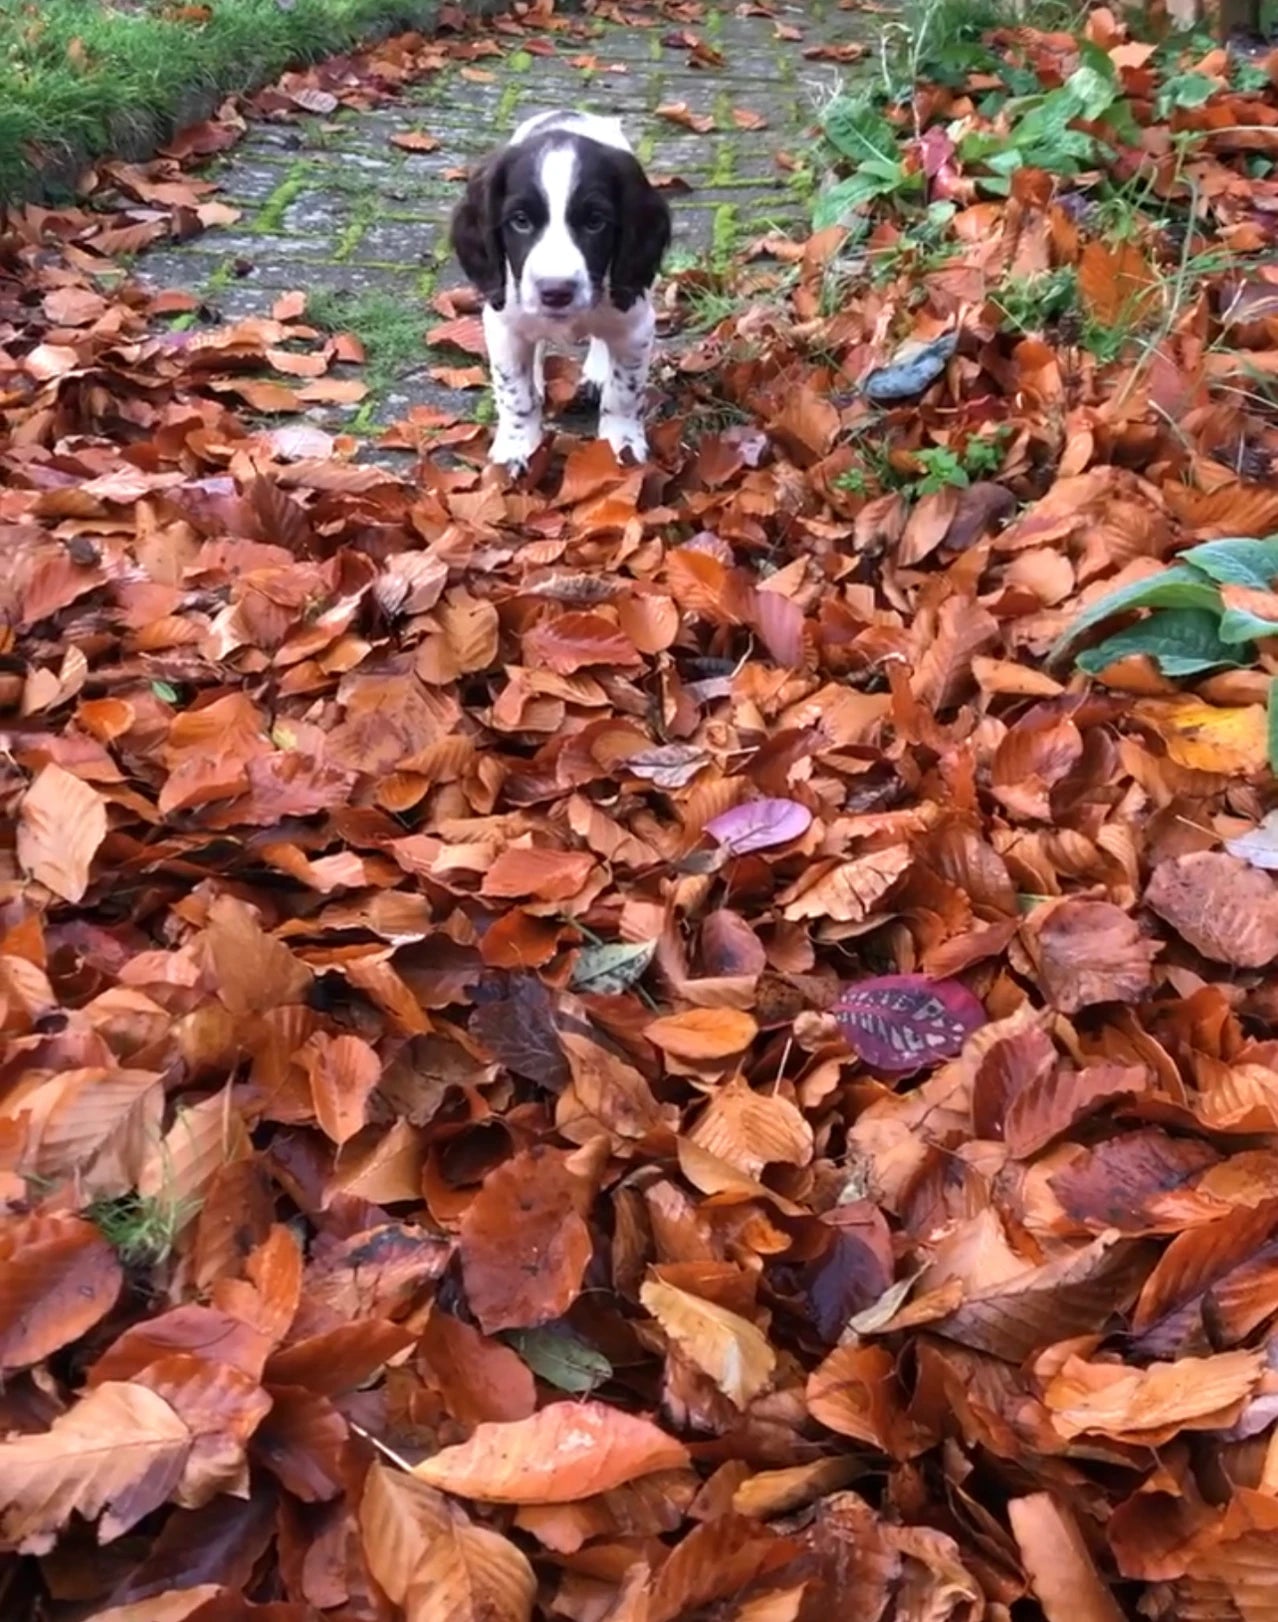 Safer Autumn walks and Adventures with your dog - 5 things to watch out for!